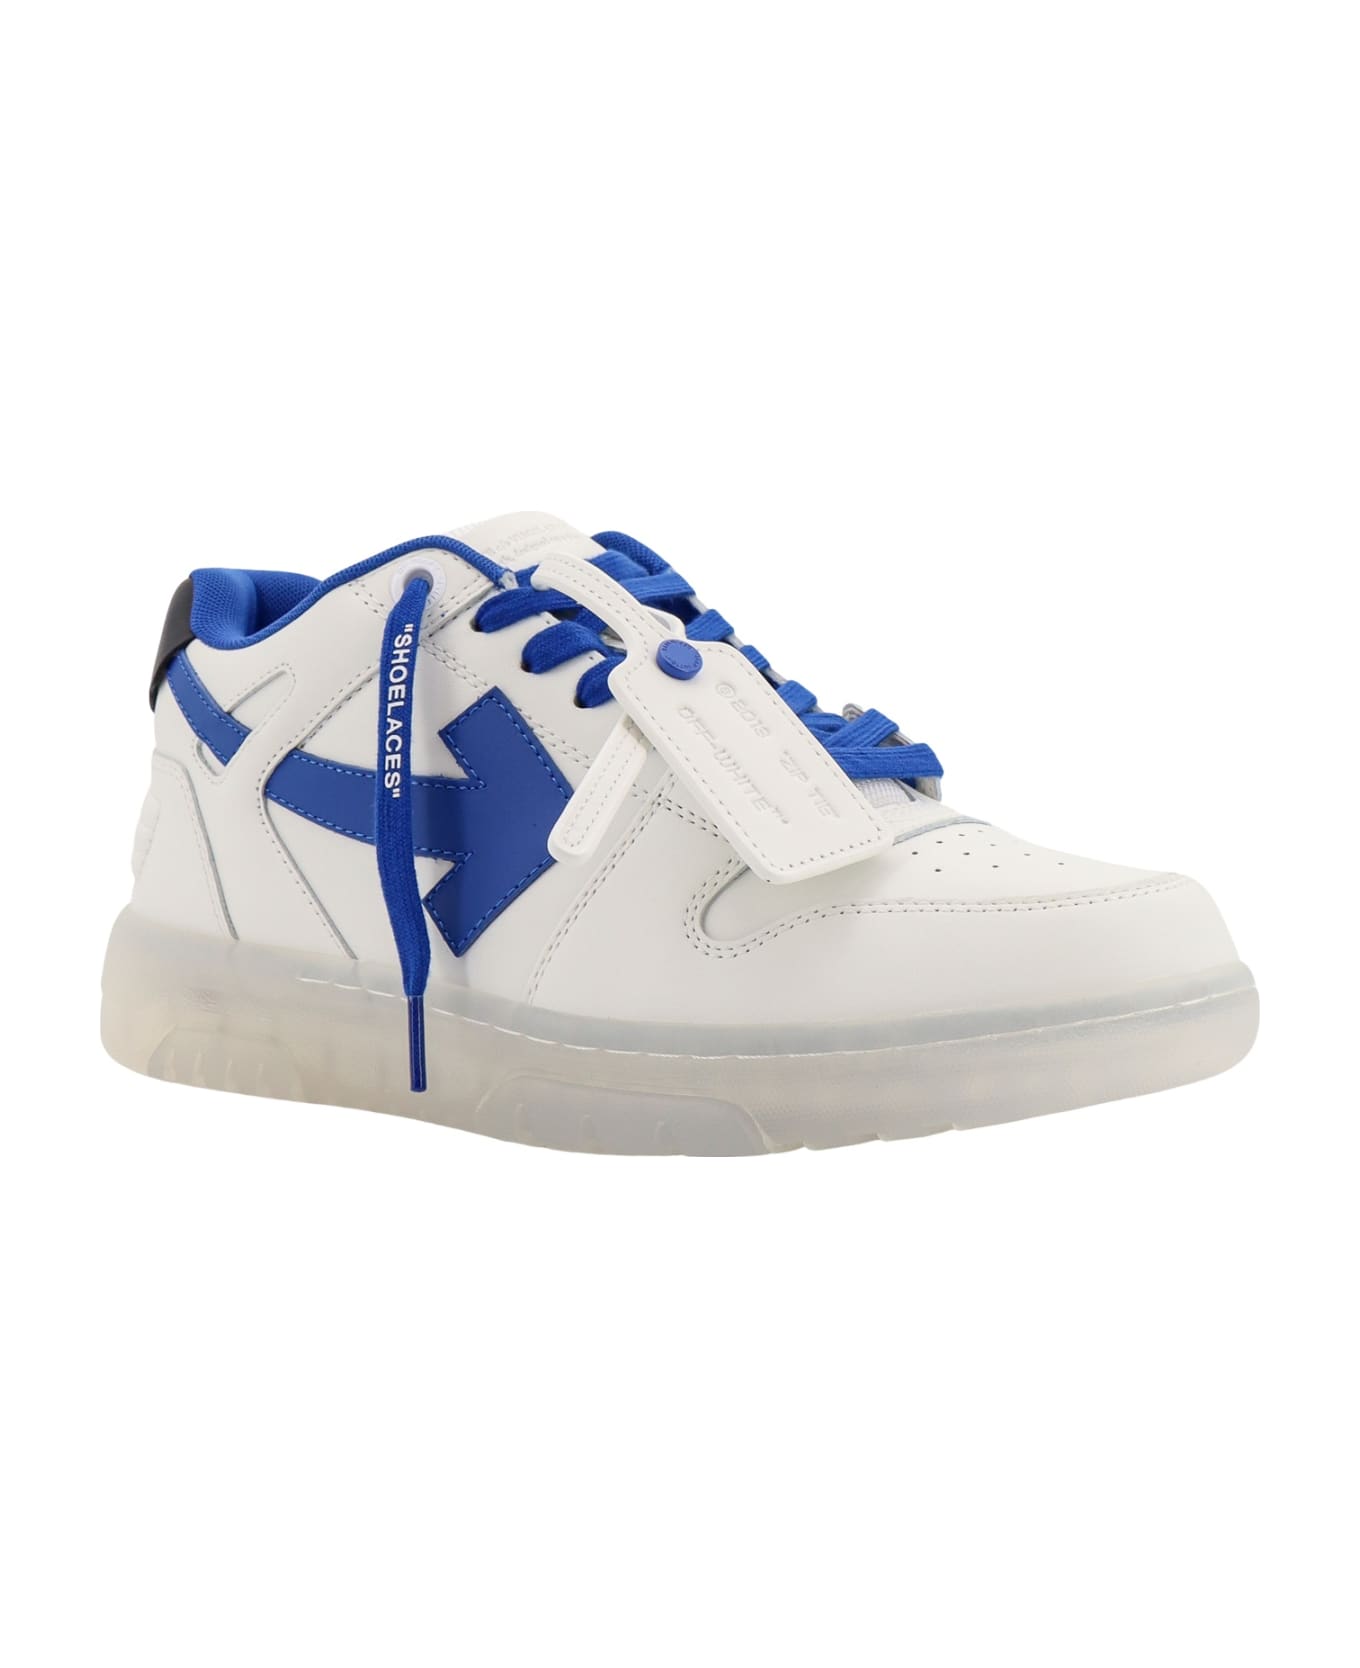 Off-White Out Of Office Sneakers - White スニーカー